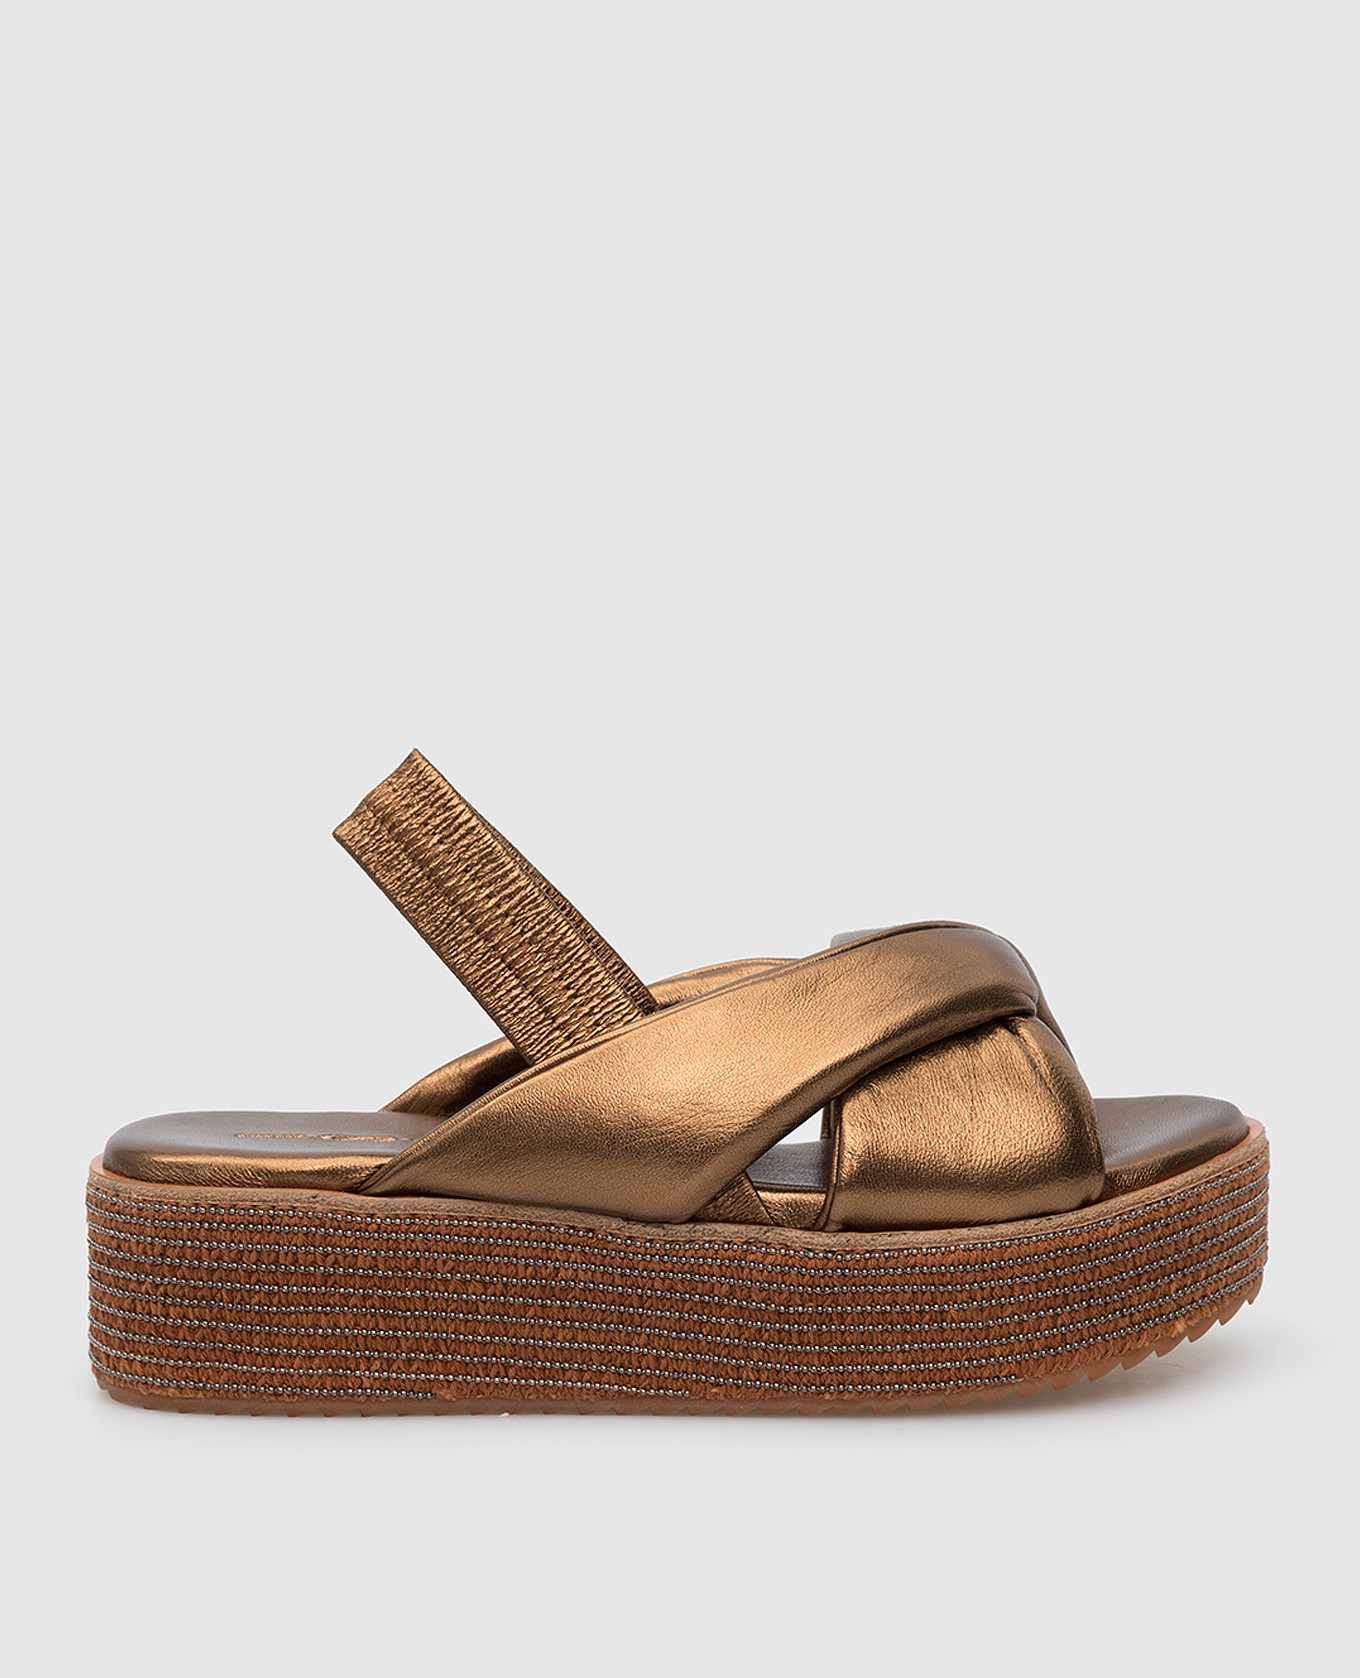 Bronze leather sandals with bulky soles with monili